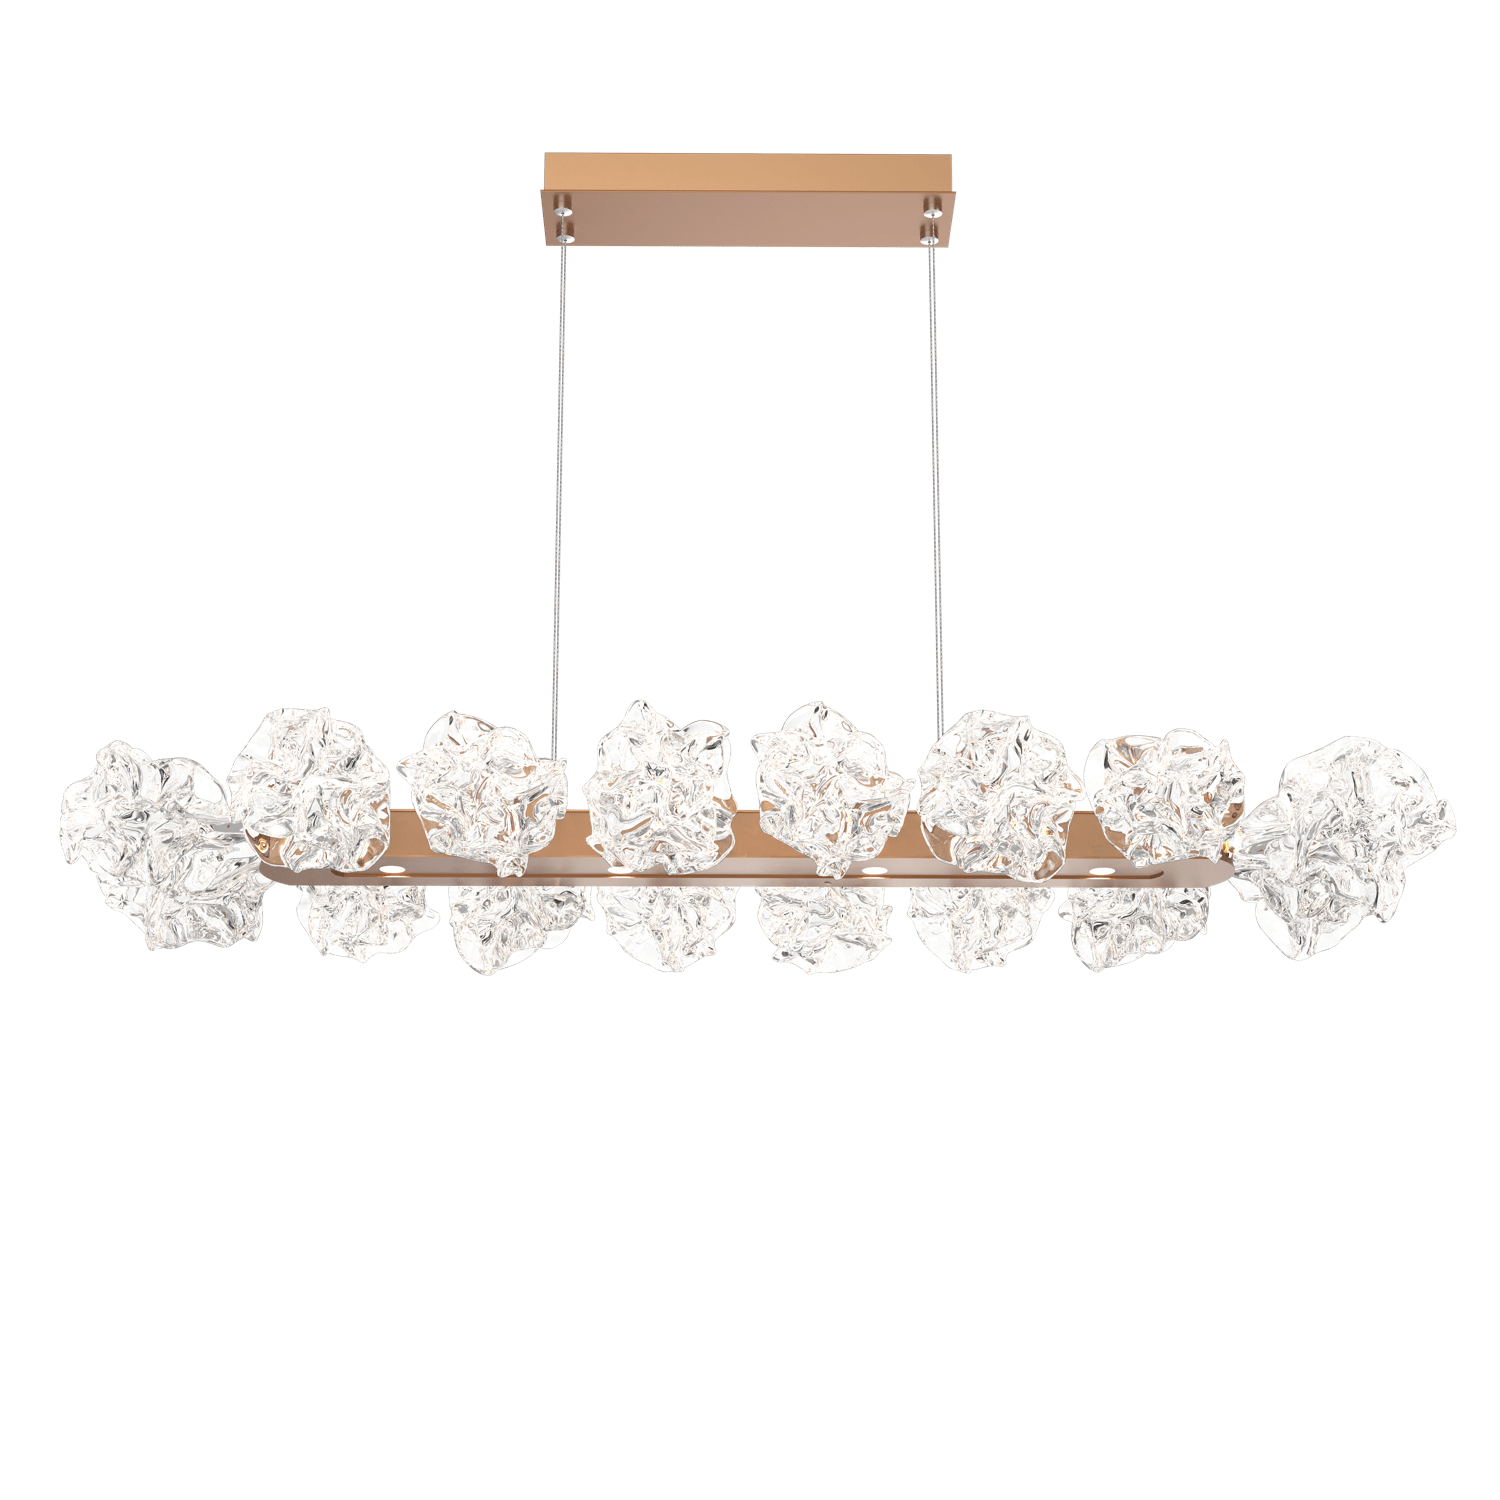 PLB0059-48-NB-Hammerton-Studio-Blossom-48-inch-linear-chandelier-with-novel-brass-finish-and-clear-handblown-crystal-glass-shades-and-LED-lamping